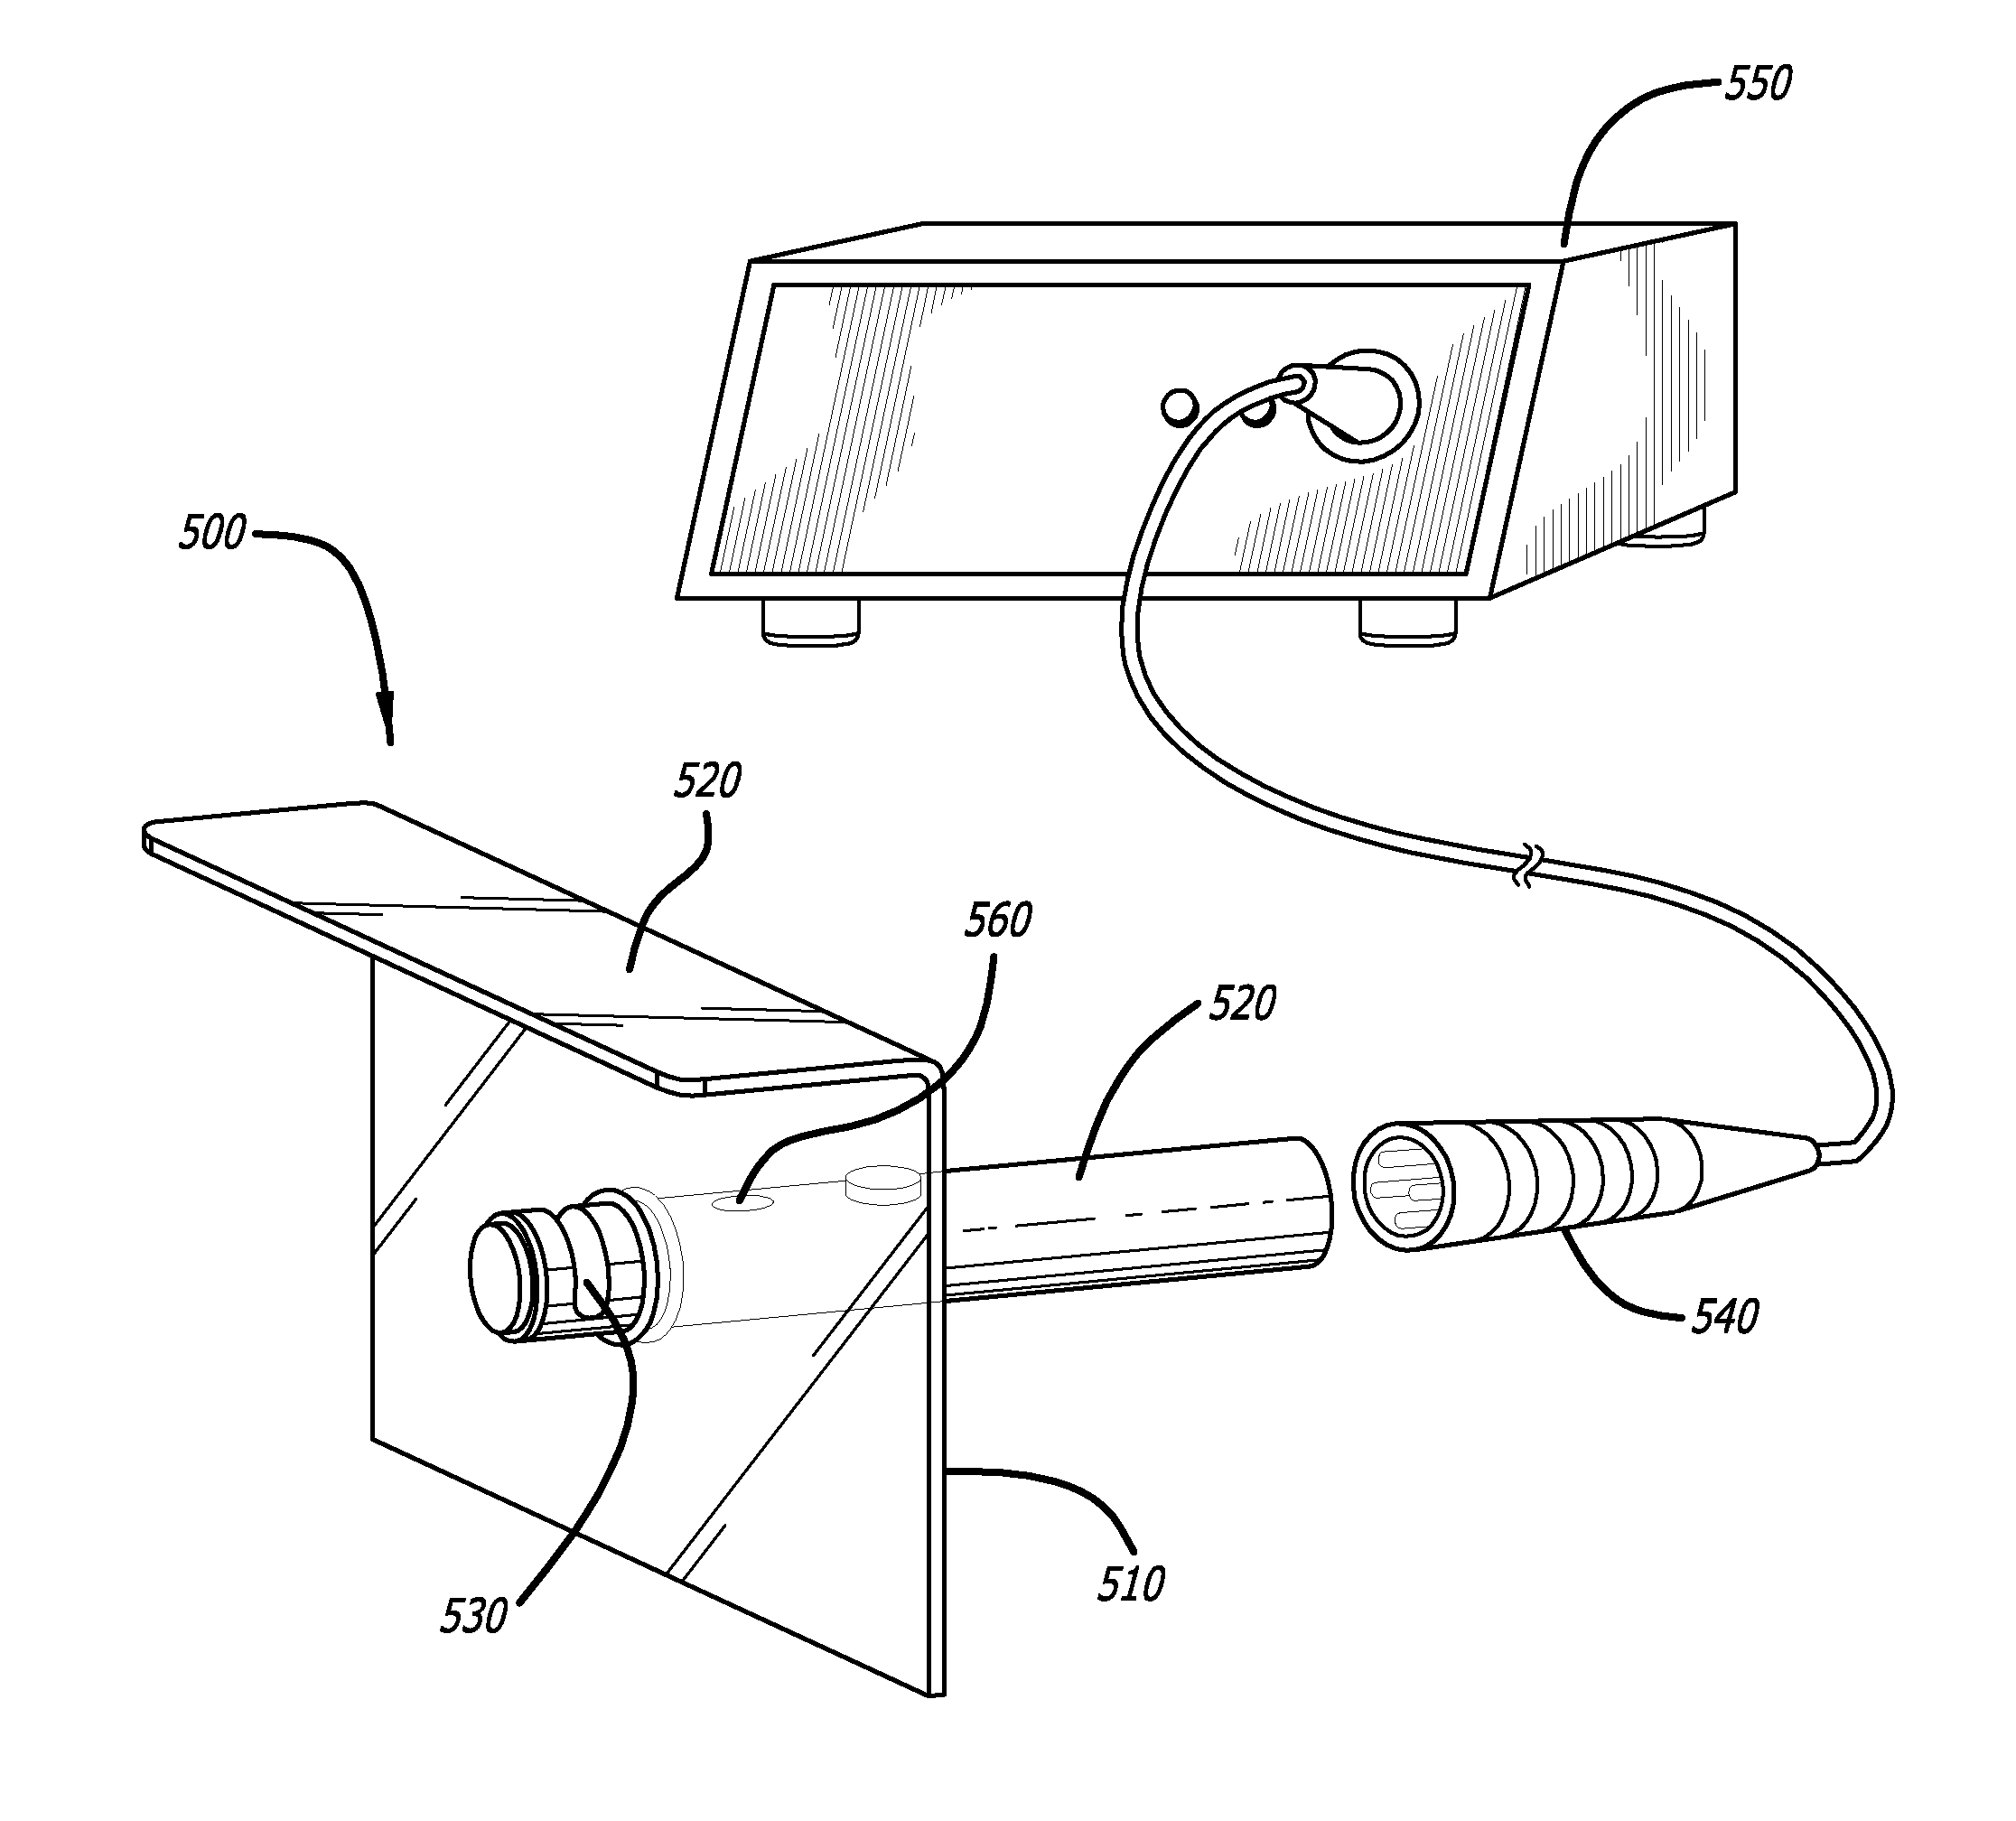 Systems and methods for enhanced protection during blood tubing sealing